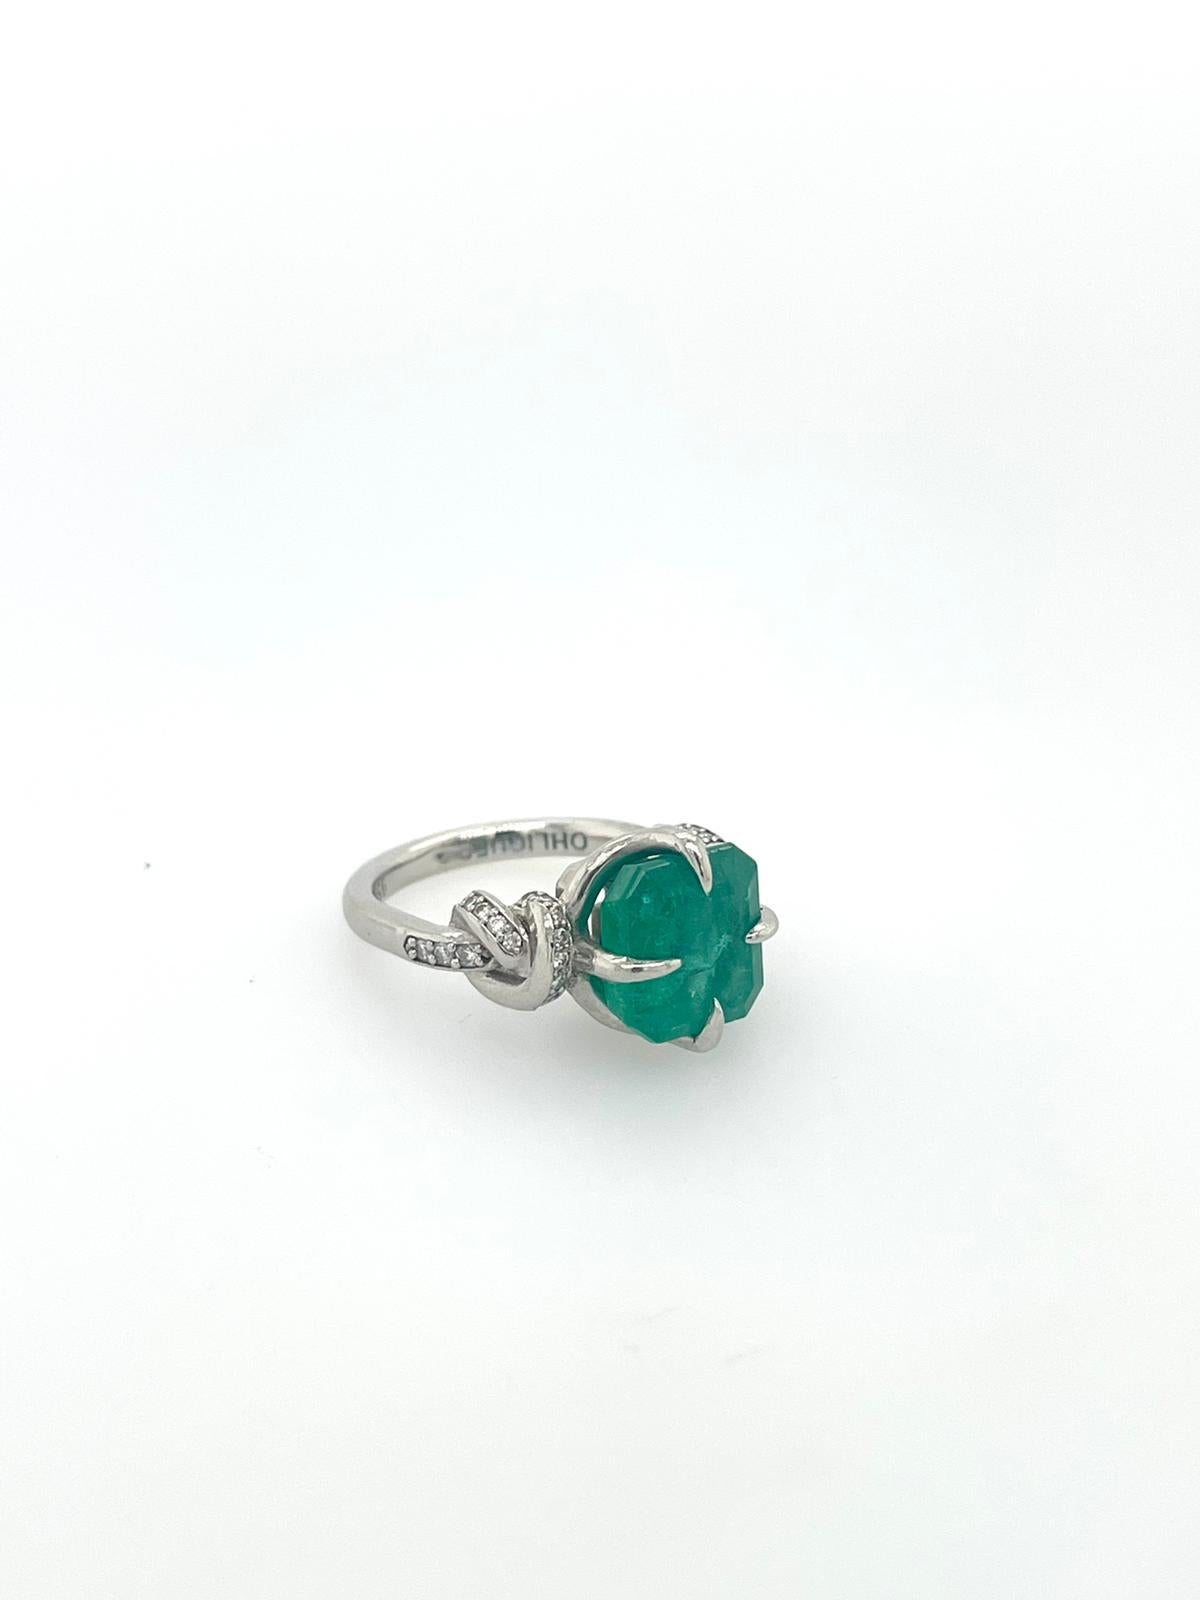 For Sale:  4ct Emerald solitaire in platinum with diamond knots  12